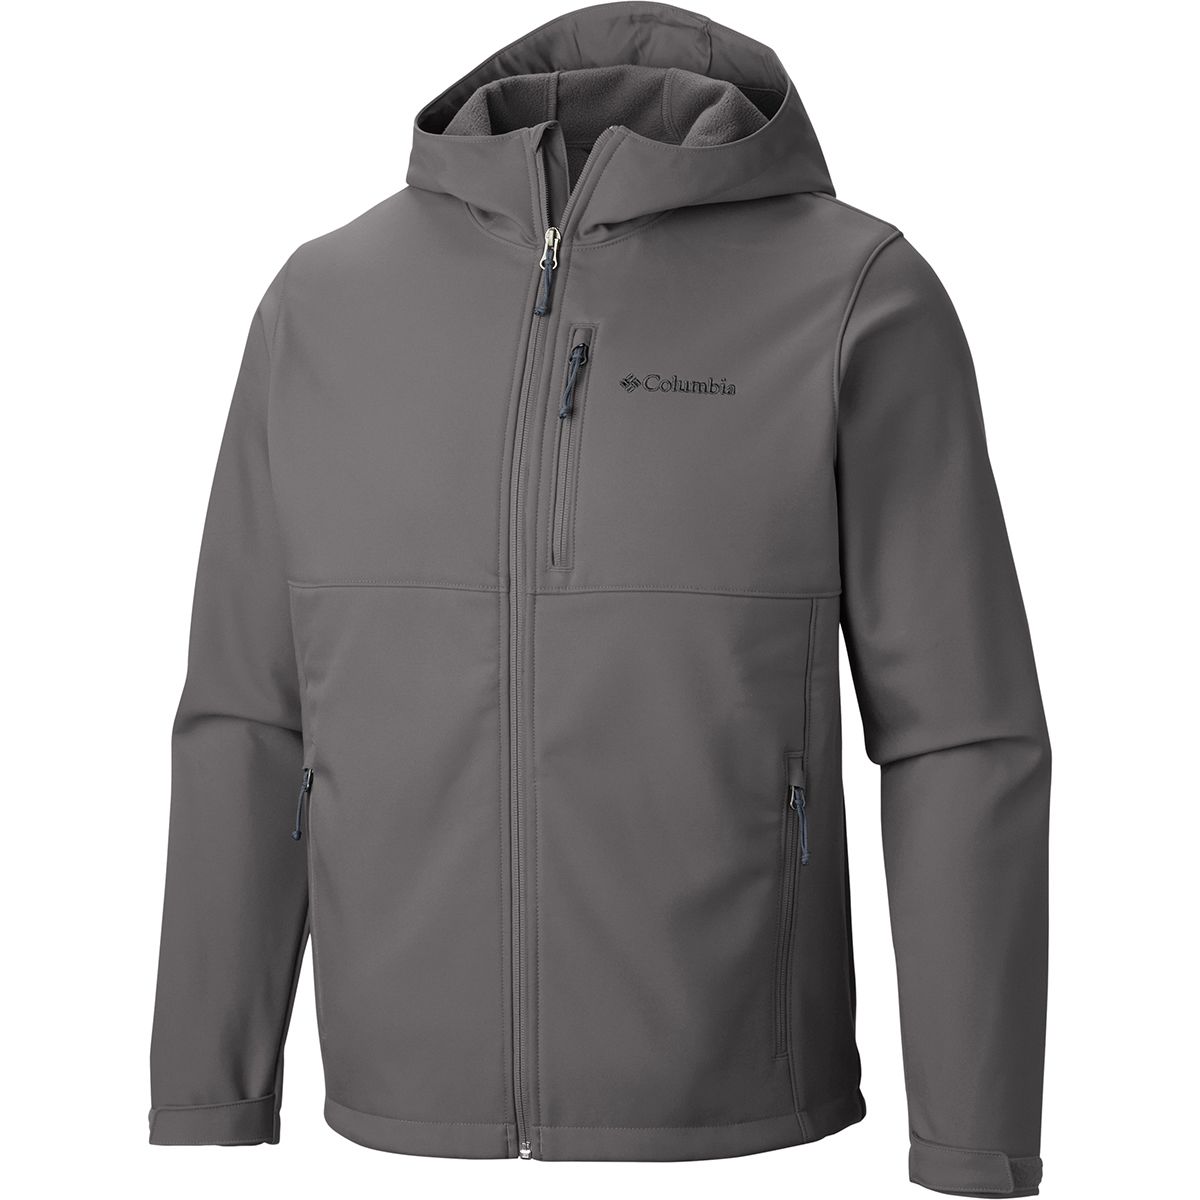 Columbia - Men's Jackets, Coats, Parkas. Sustainable fashion and apparel.